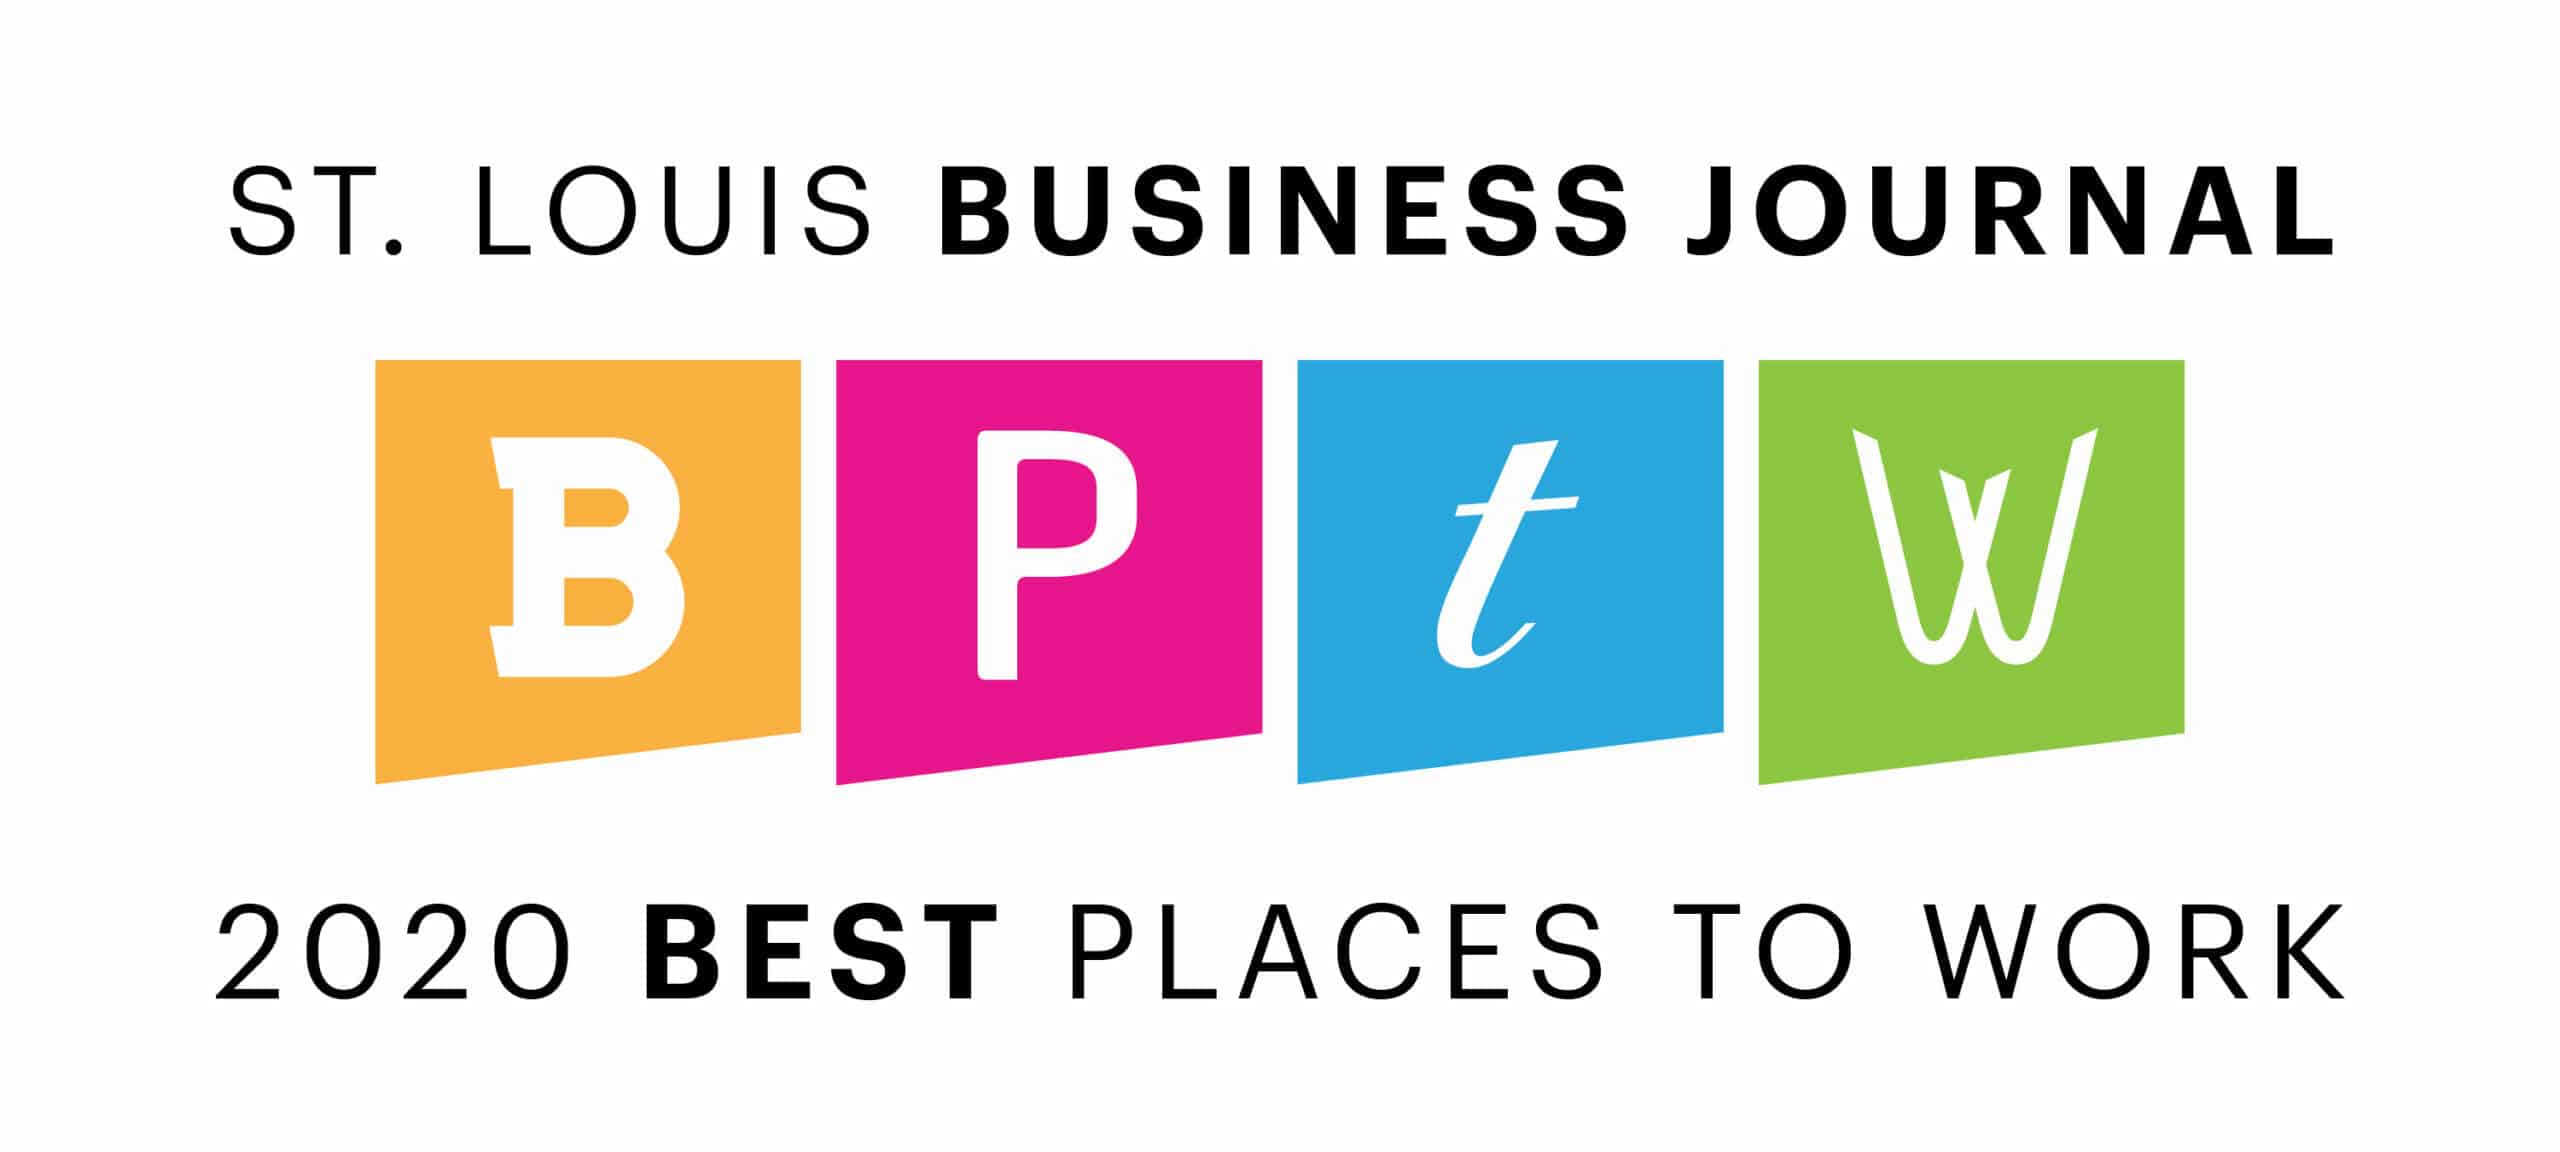 St Louis Business Journal 2020 Best Place to Work